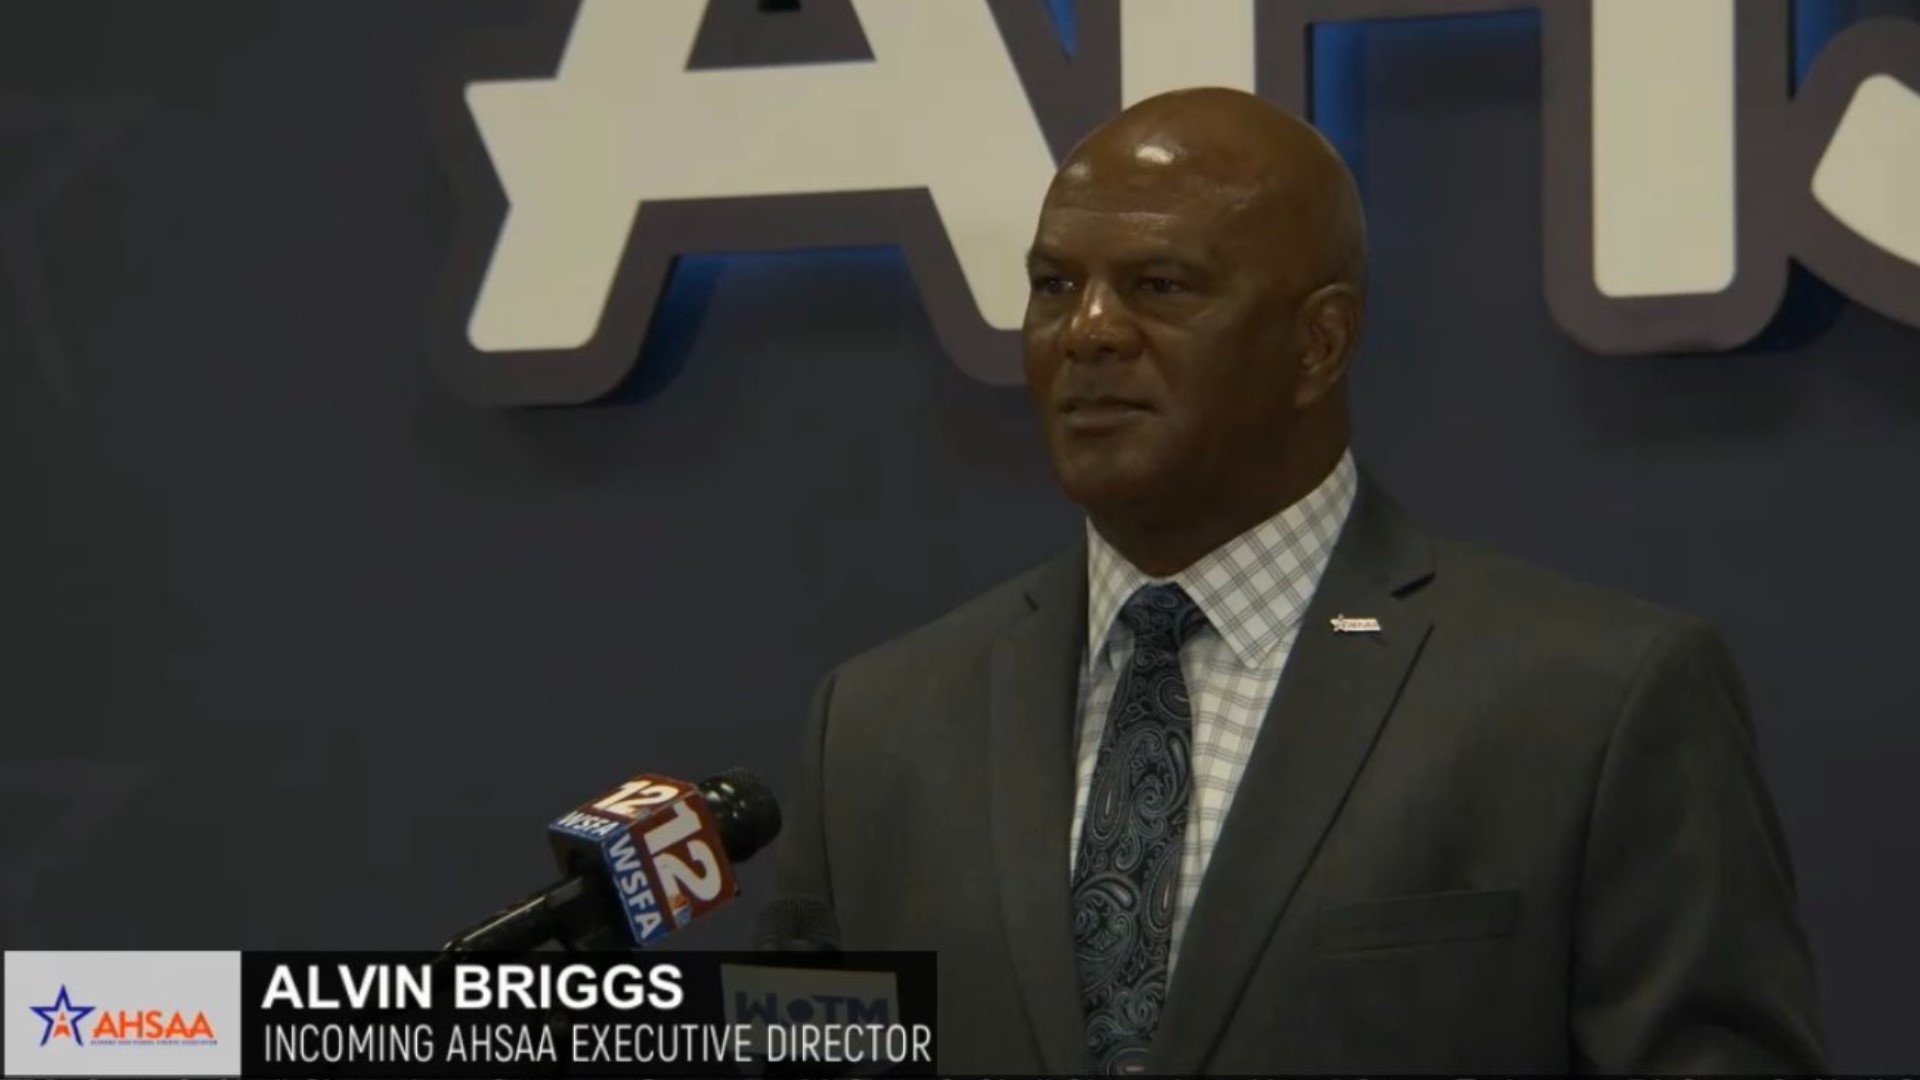 Current Associate Executive Director Alvin Briggs has been selected to become the fifth Executive Director of the Alabama High School Athletic Association.